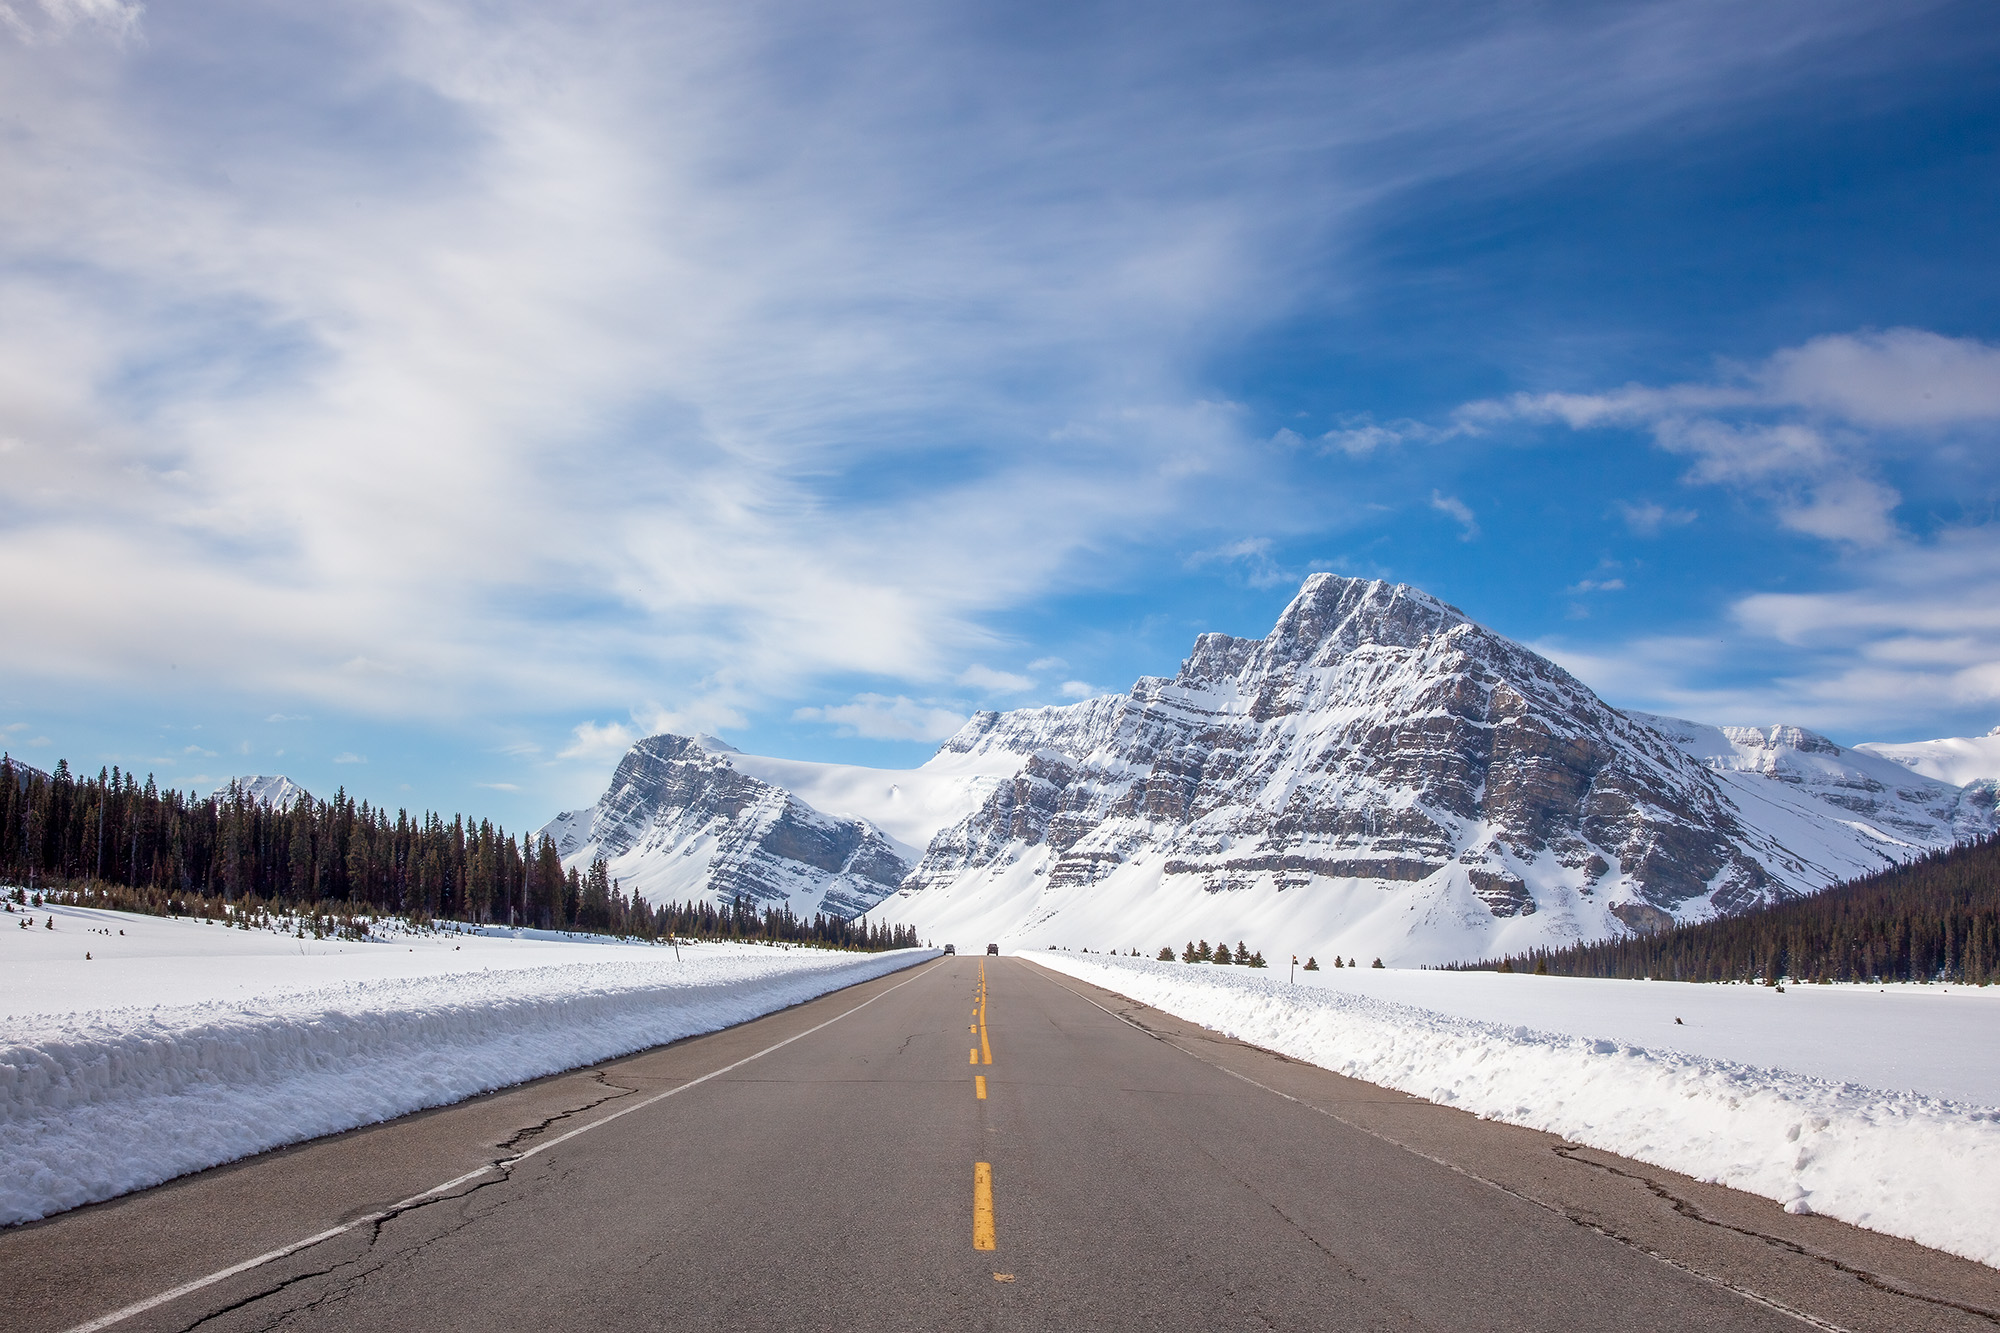 In this image, we gaze up the highway along the Icefields Parkway in Jasper National Park, Canada. Following a late spring snowstorm...